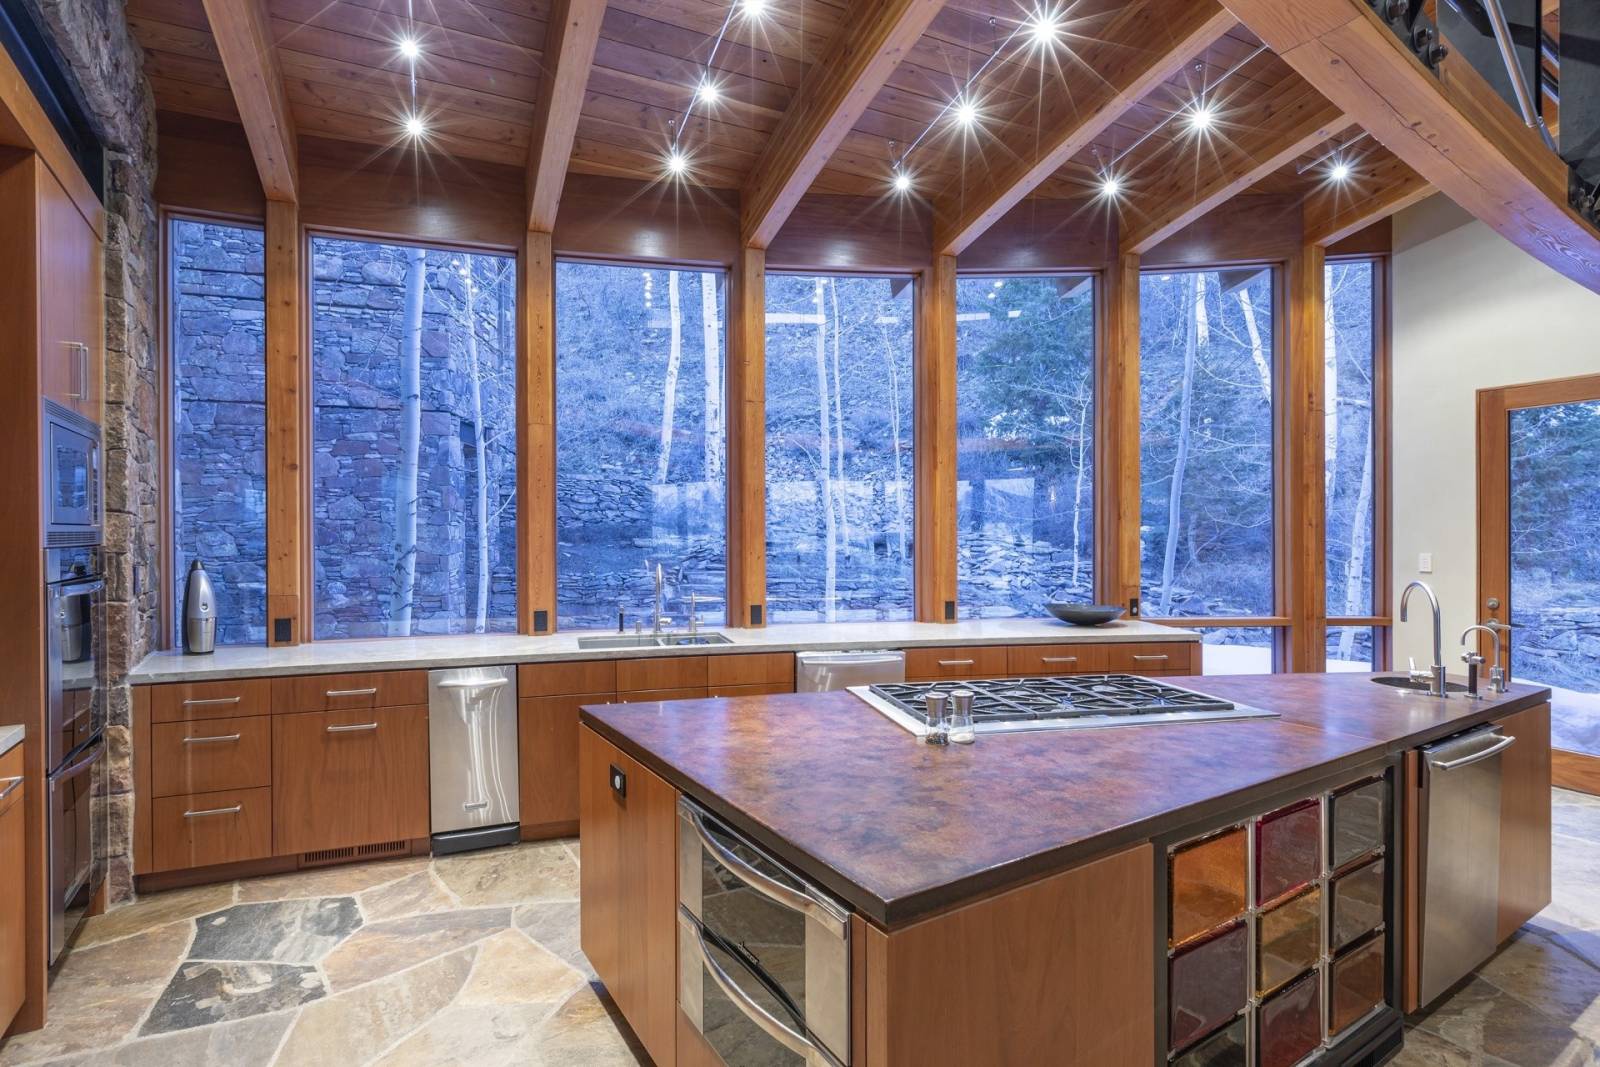 Telluride Vacation Rentals, PaGomo* - Cook your favorite meals while watching nature at its best